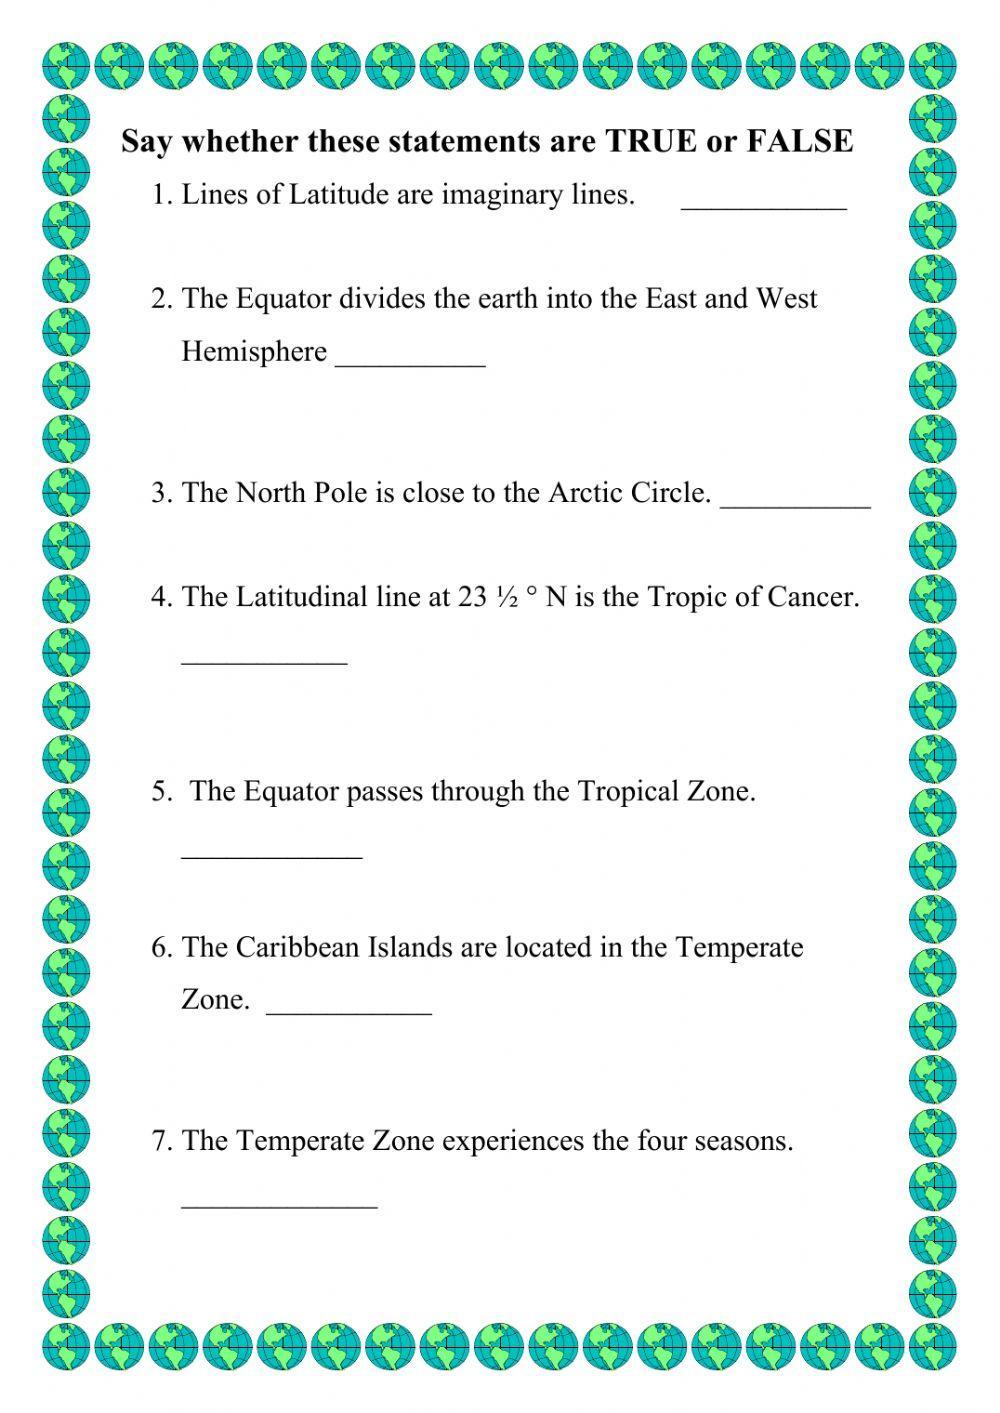 Lines of Latitude and Climatic Zones